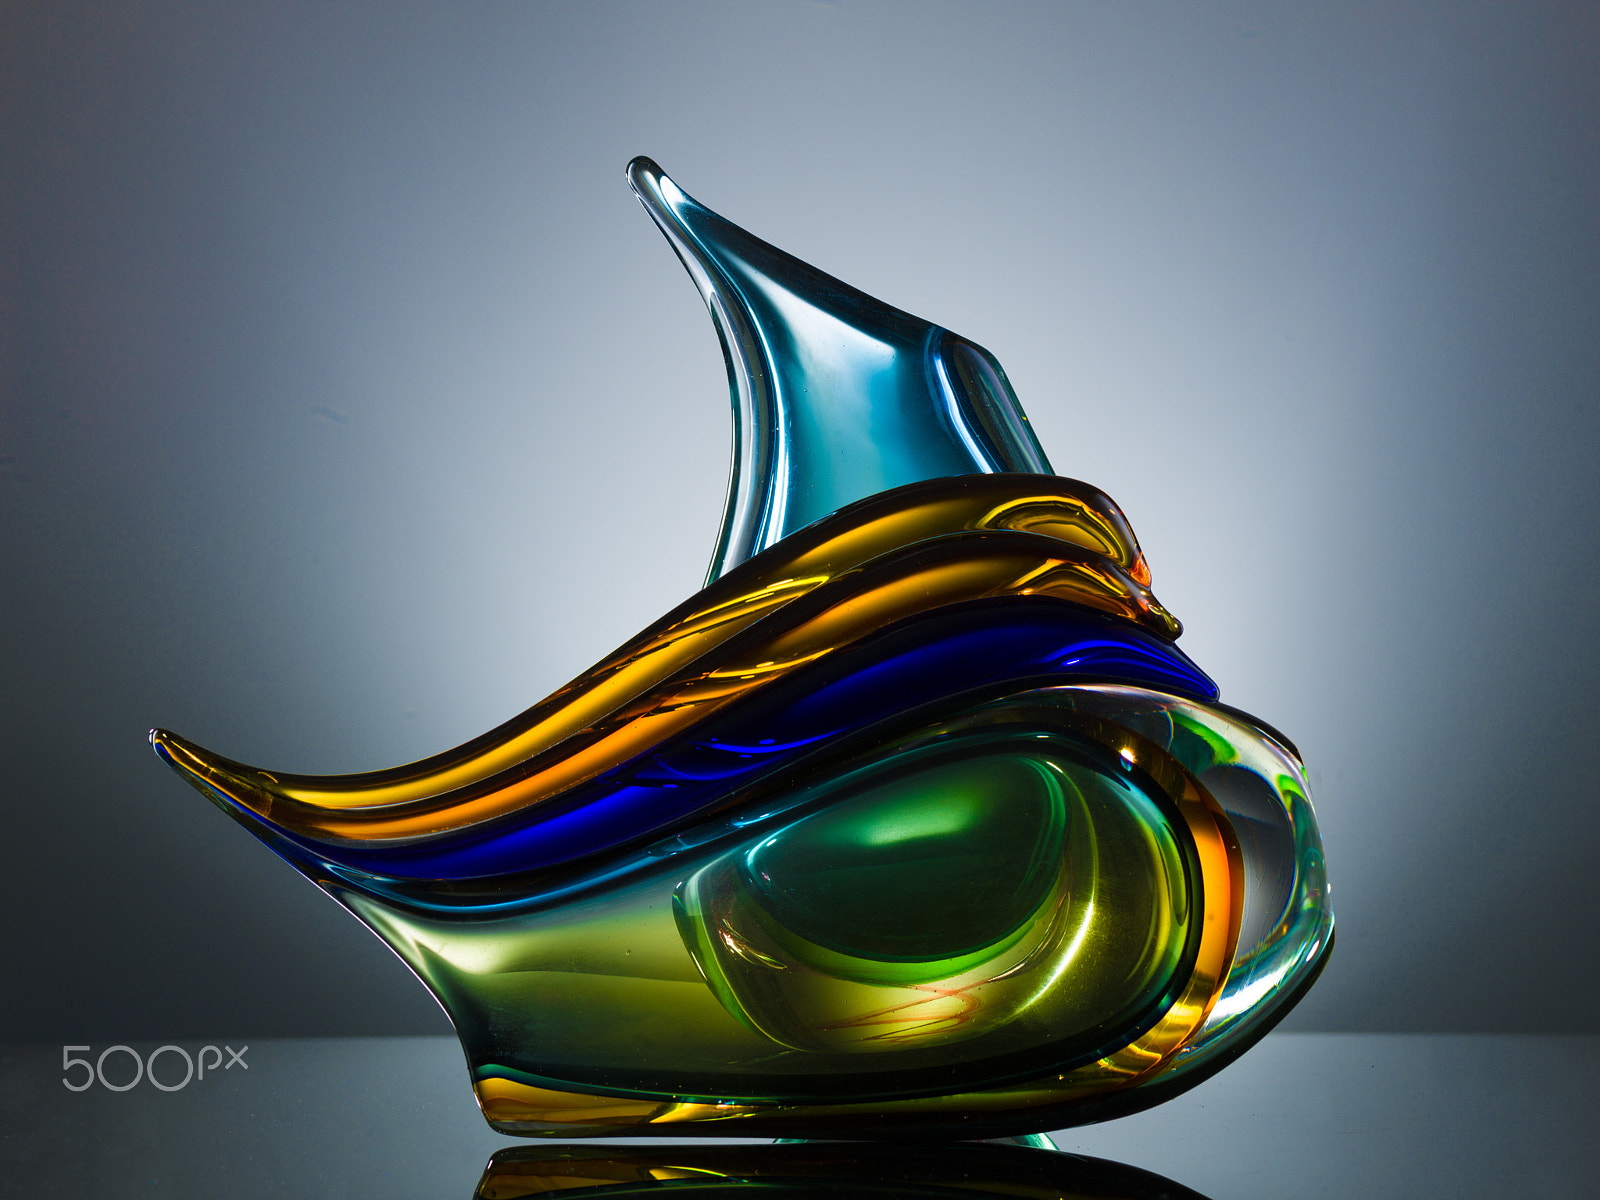 Hasselblad H4D-40 sample photo. Colorful glass photography